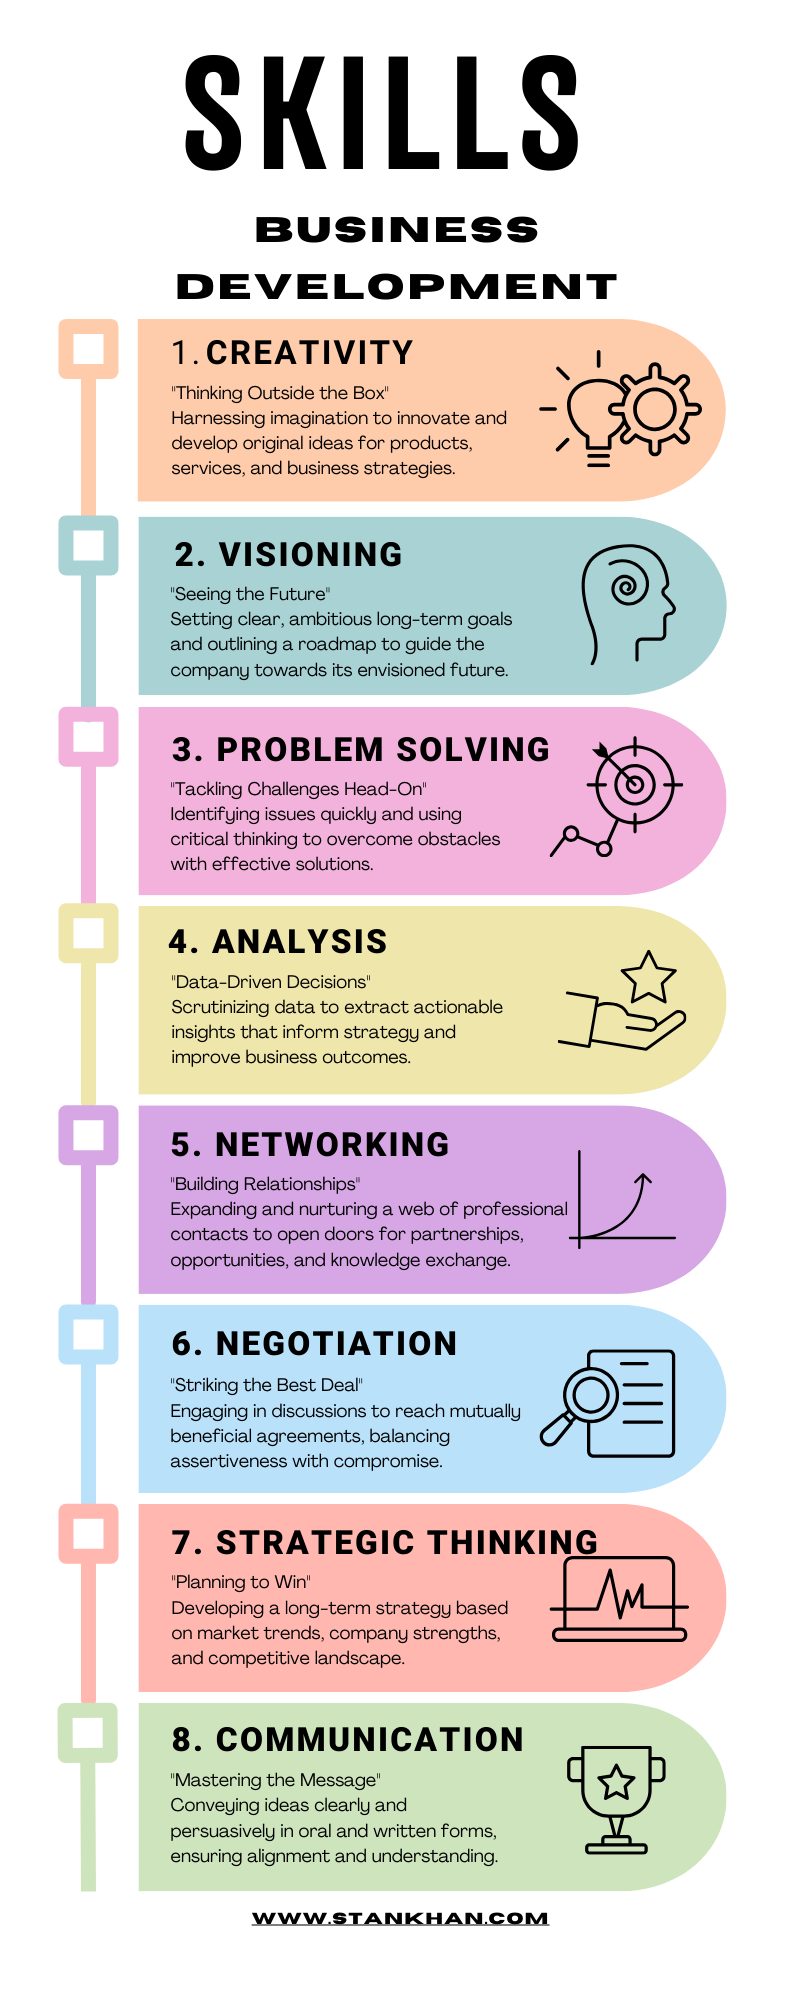 An infographic showing the core skills required for business development: 1. Creativity, 2. Visioning, 3. Problem Solving, 4. Analysis, 5. Networking, 6. Negotiation, 7. Strategic Thinking, 8 Communication